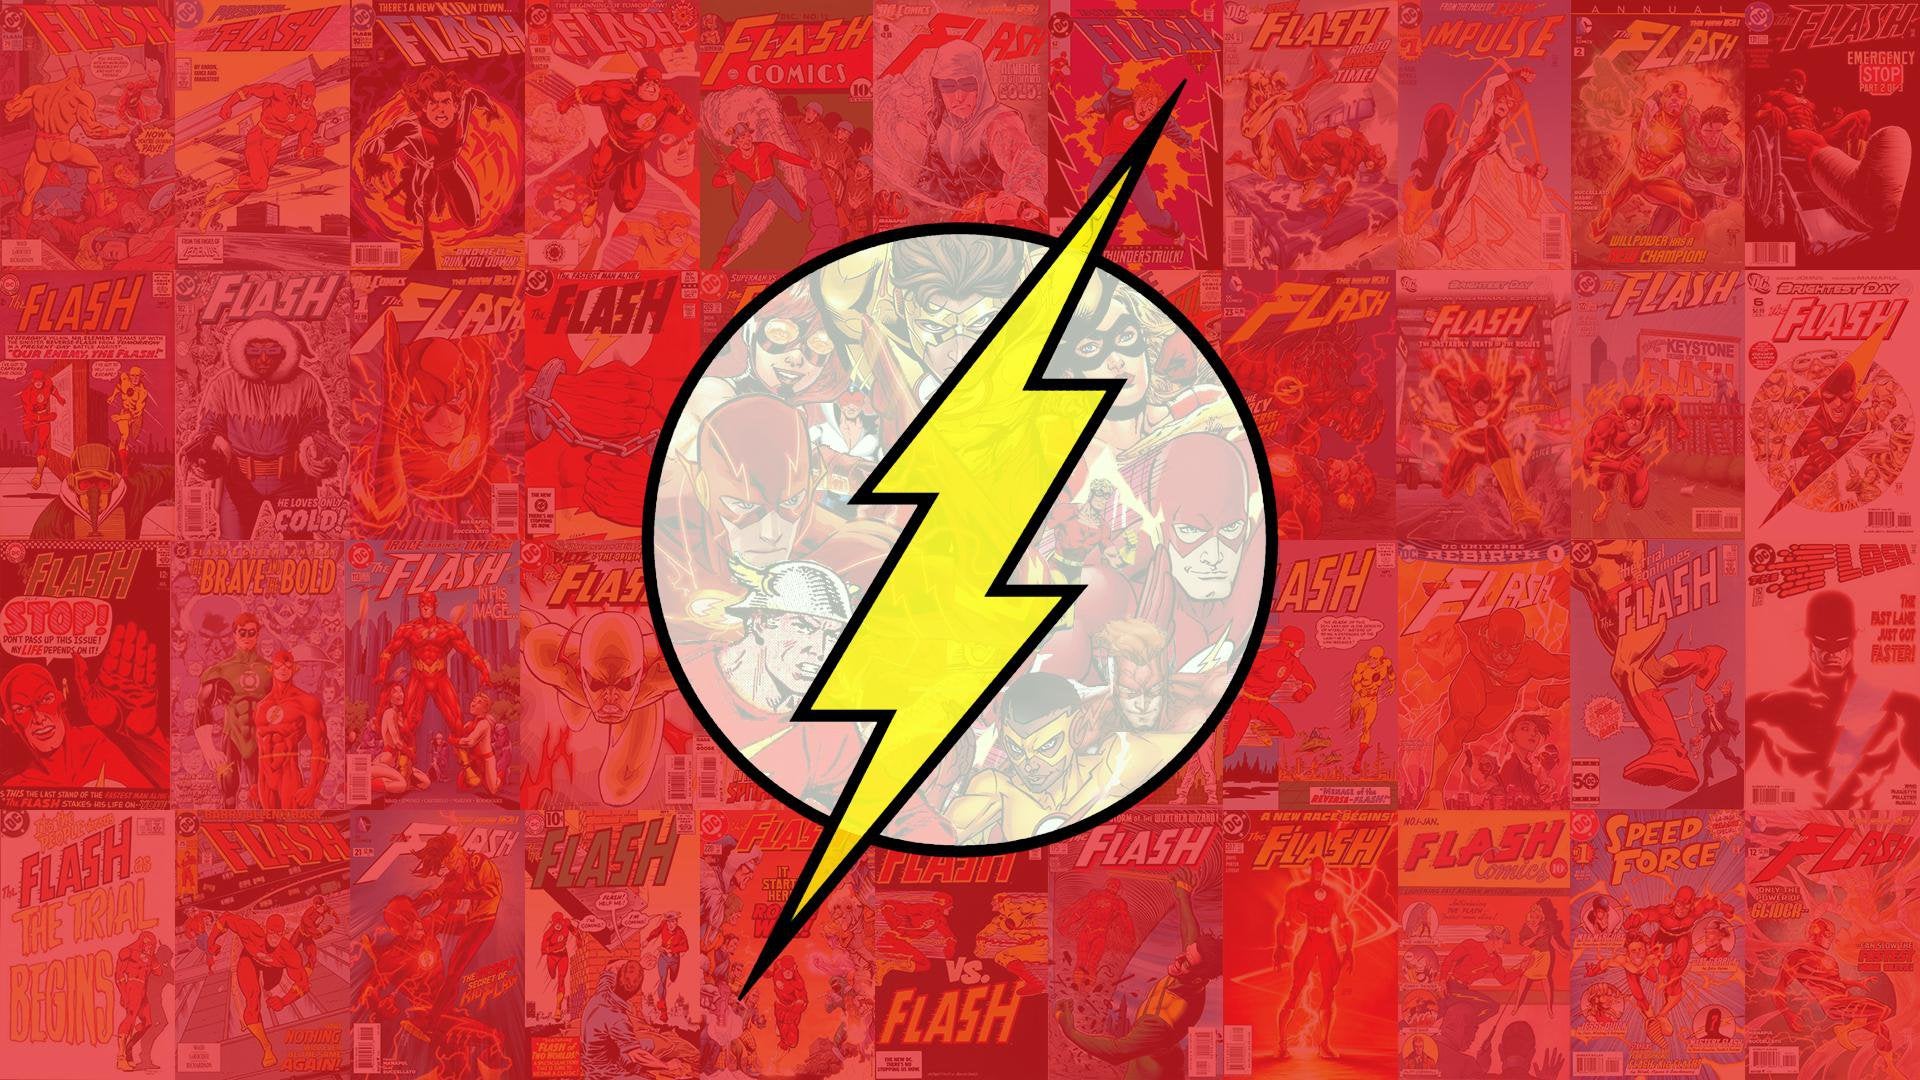 A flash family desktop wallpaper i made that also doubled as a phone wallpaper for me rtheflash